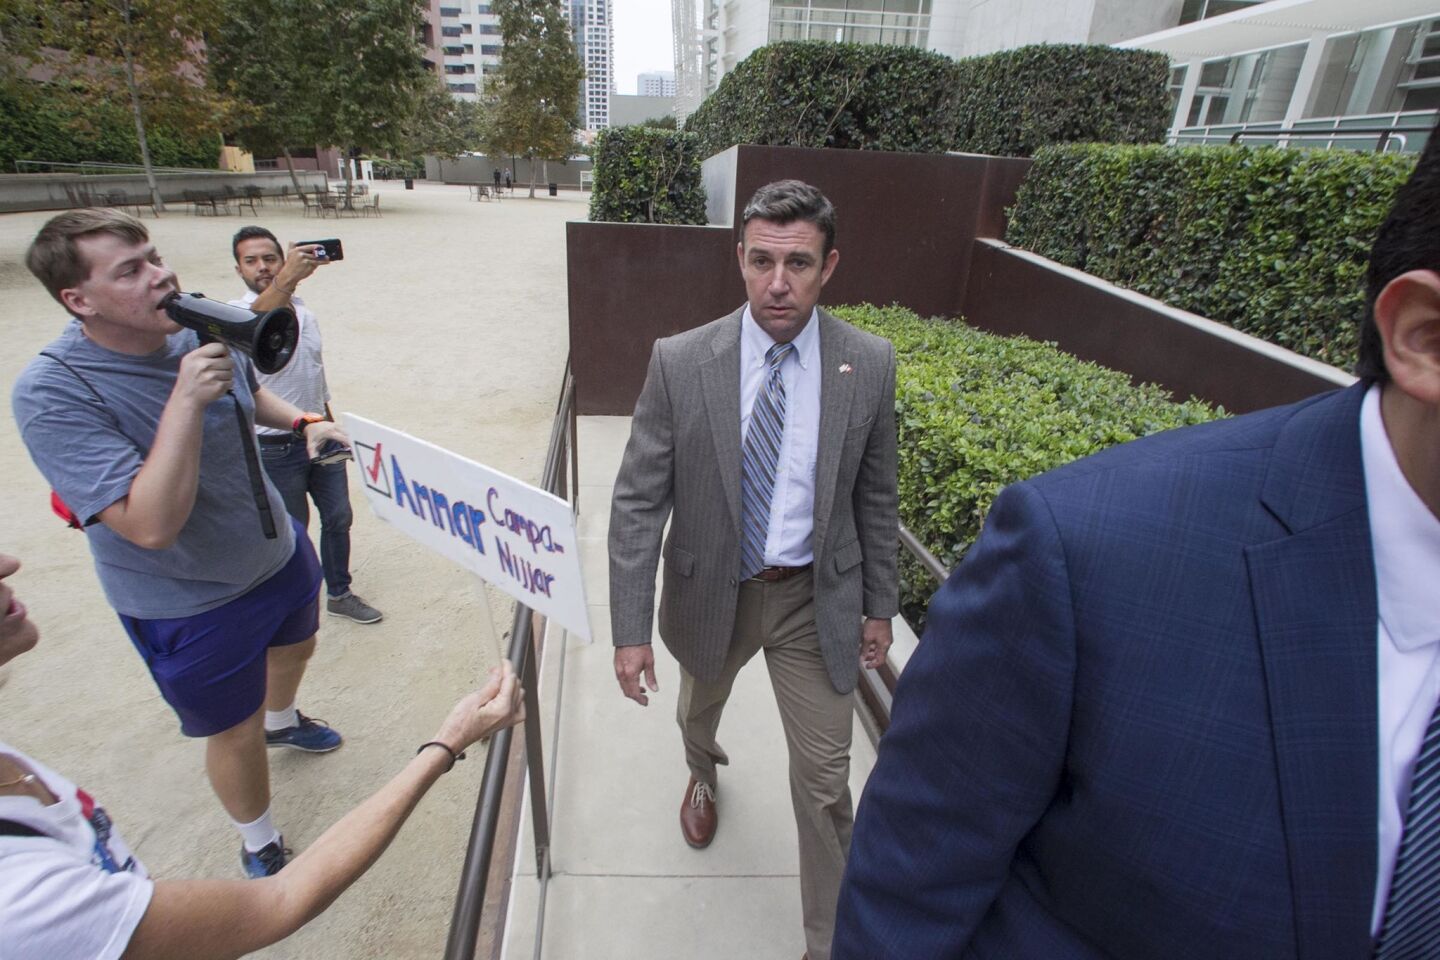 Protesters heckled Rep. Duncan Hunter Jr. as he walked up the ramp to the new courthouse building in downtown San Diego.